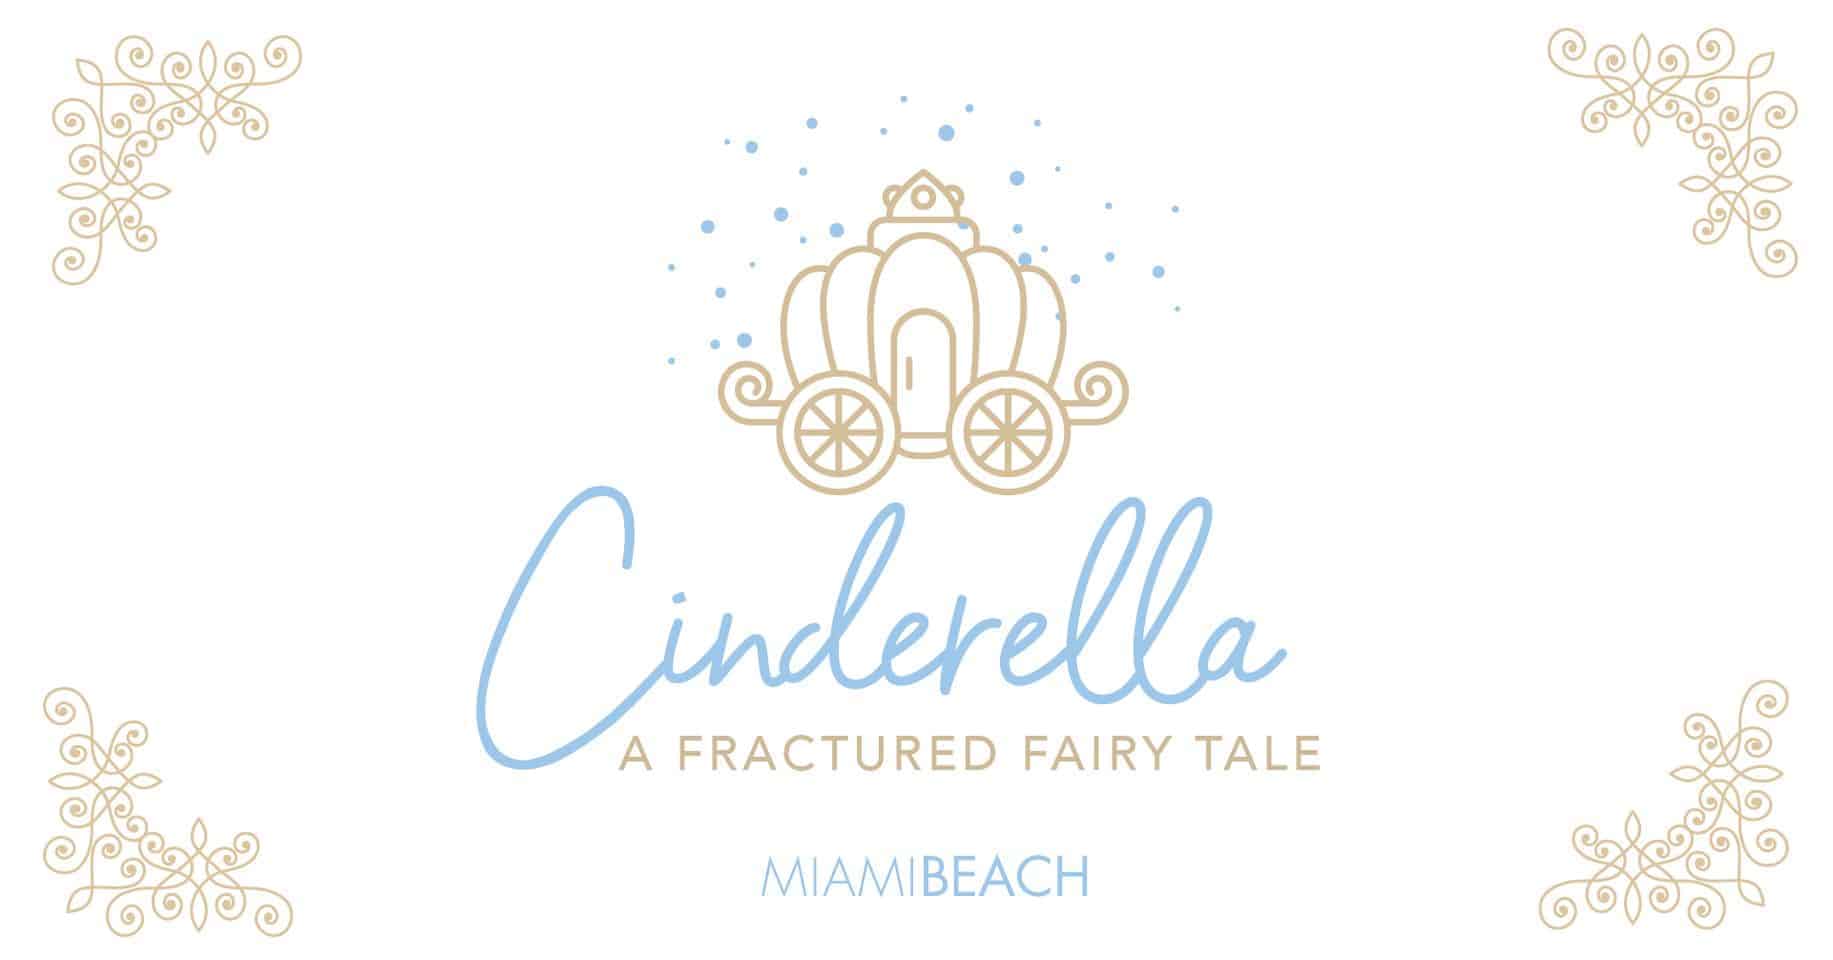 City of Miami Beach - Cinderellla - A Fractured Fairy Tale